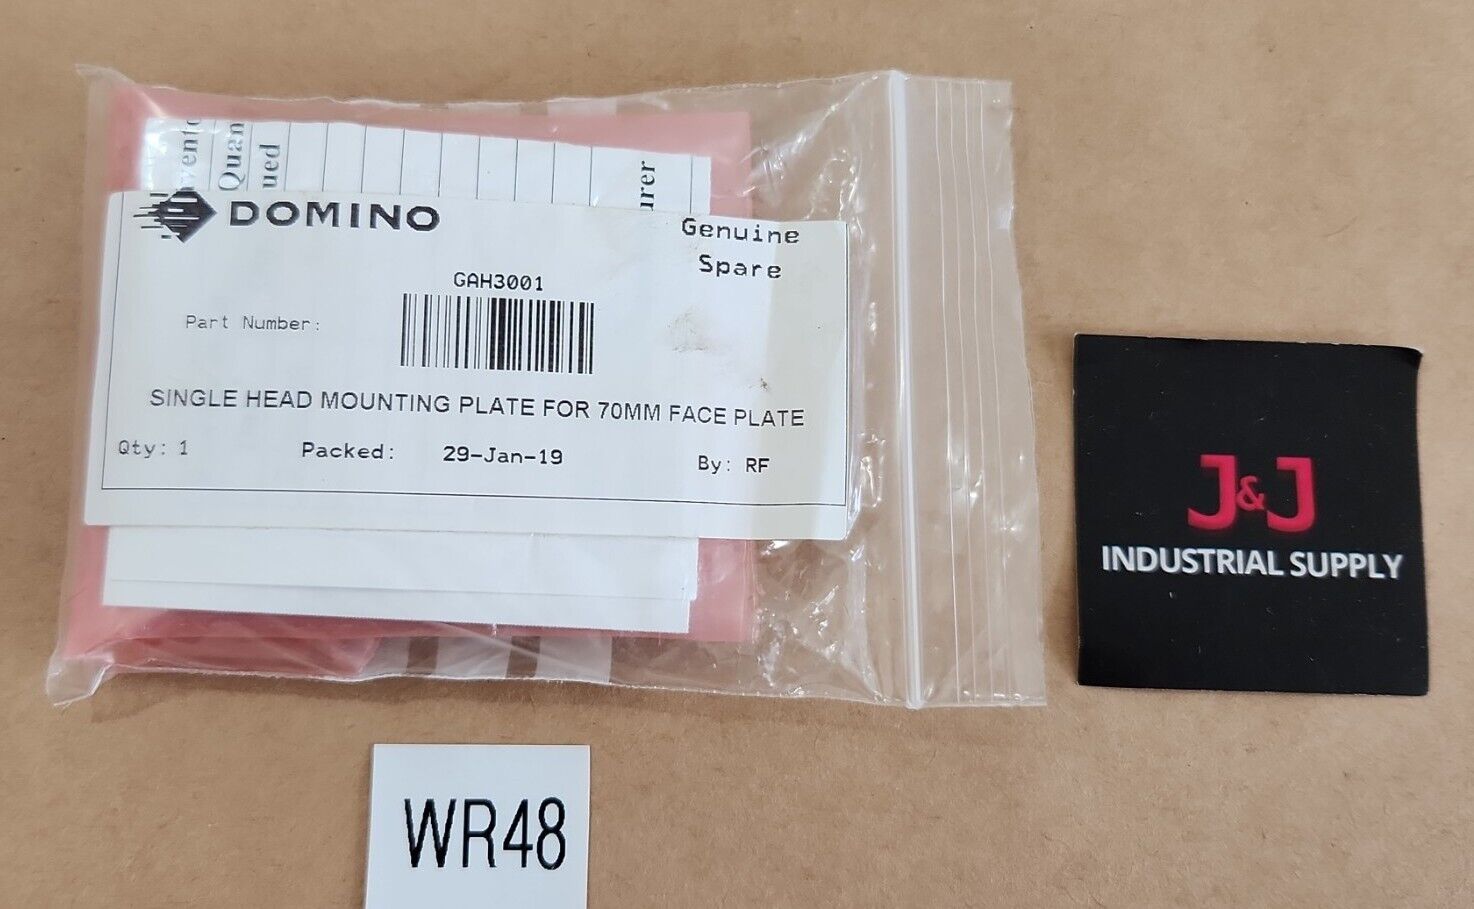 *NEW* Domino GAH3001 Single Head Mounting Plate For 70mm Face Plate + Warranty